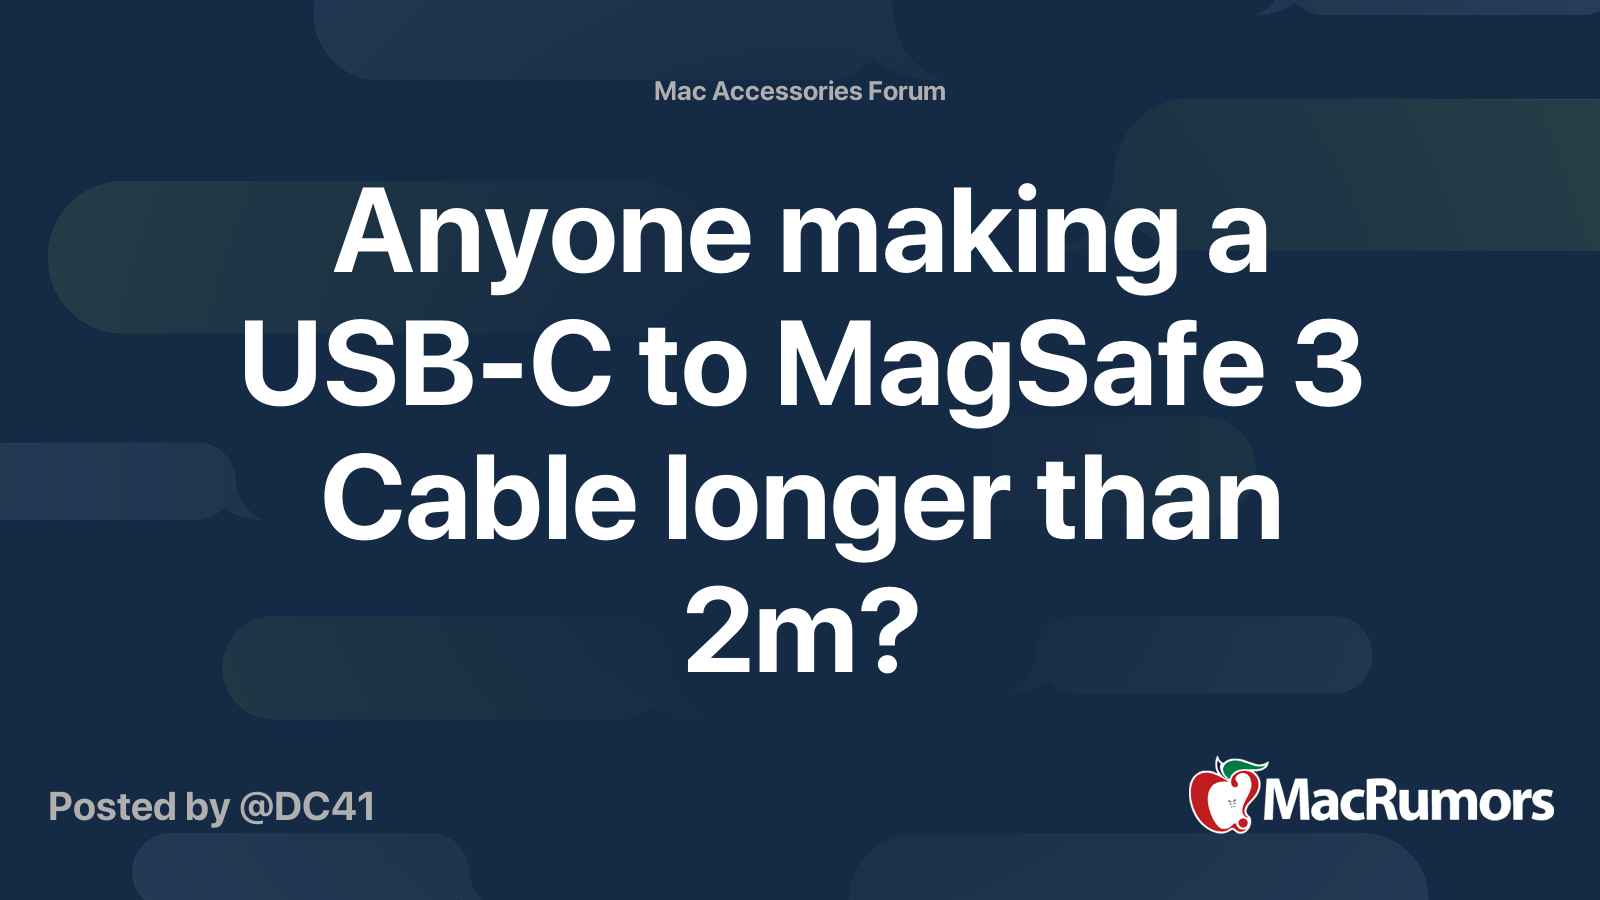 Anyone making a USB-C to MagSafe 3 Cable longer than 2m